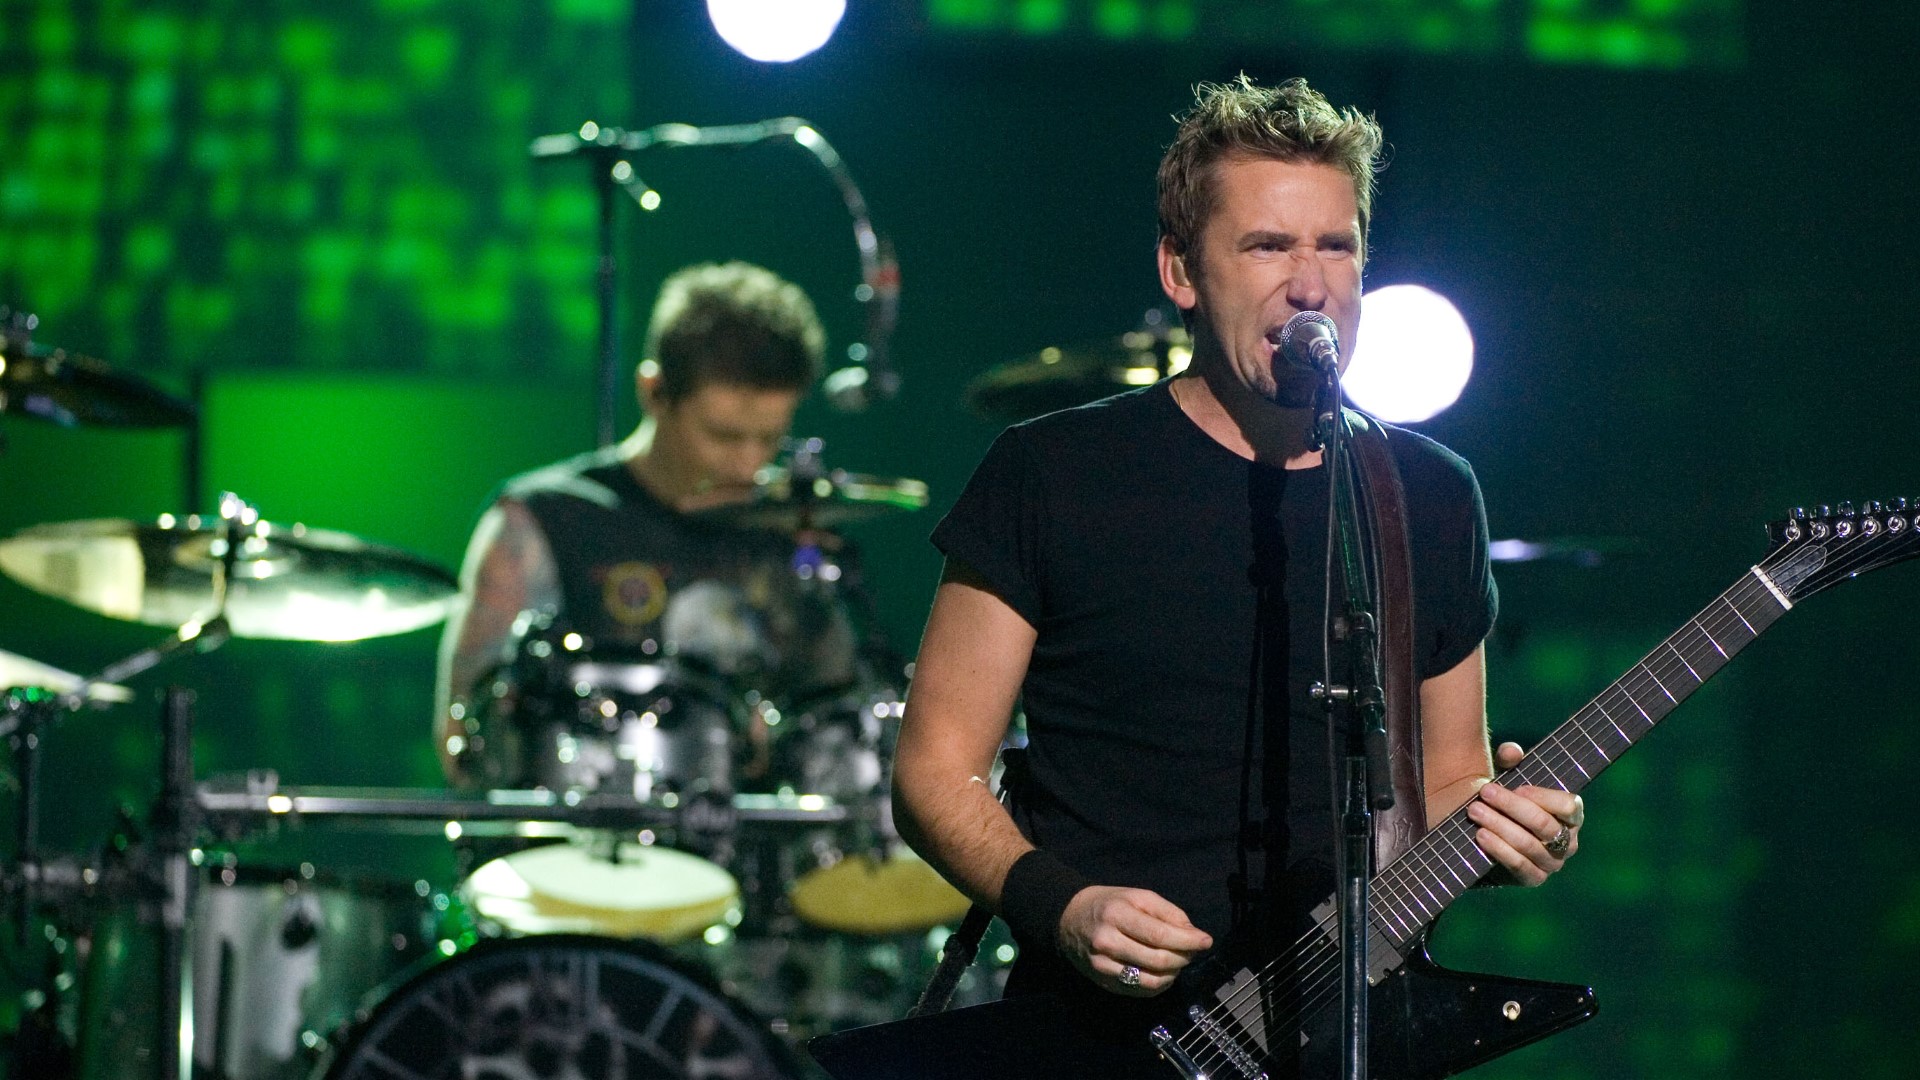 Nickelback tour coming to Blossom Music Center in August